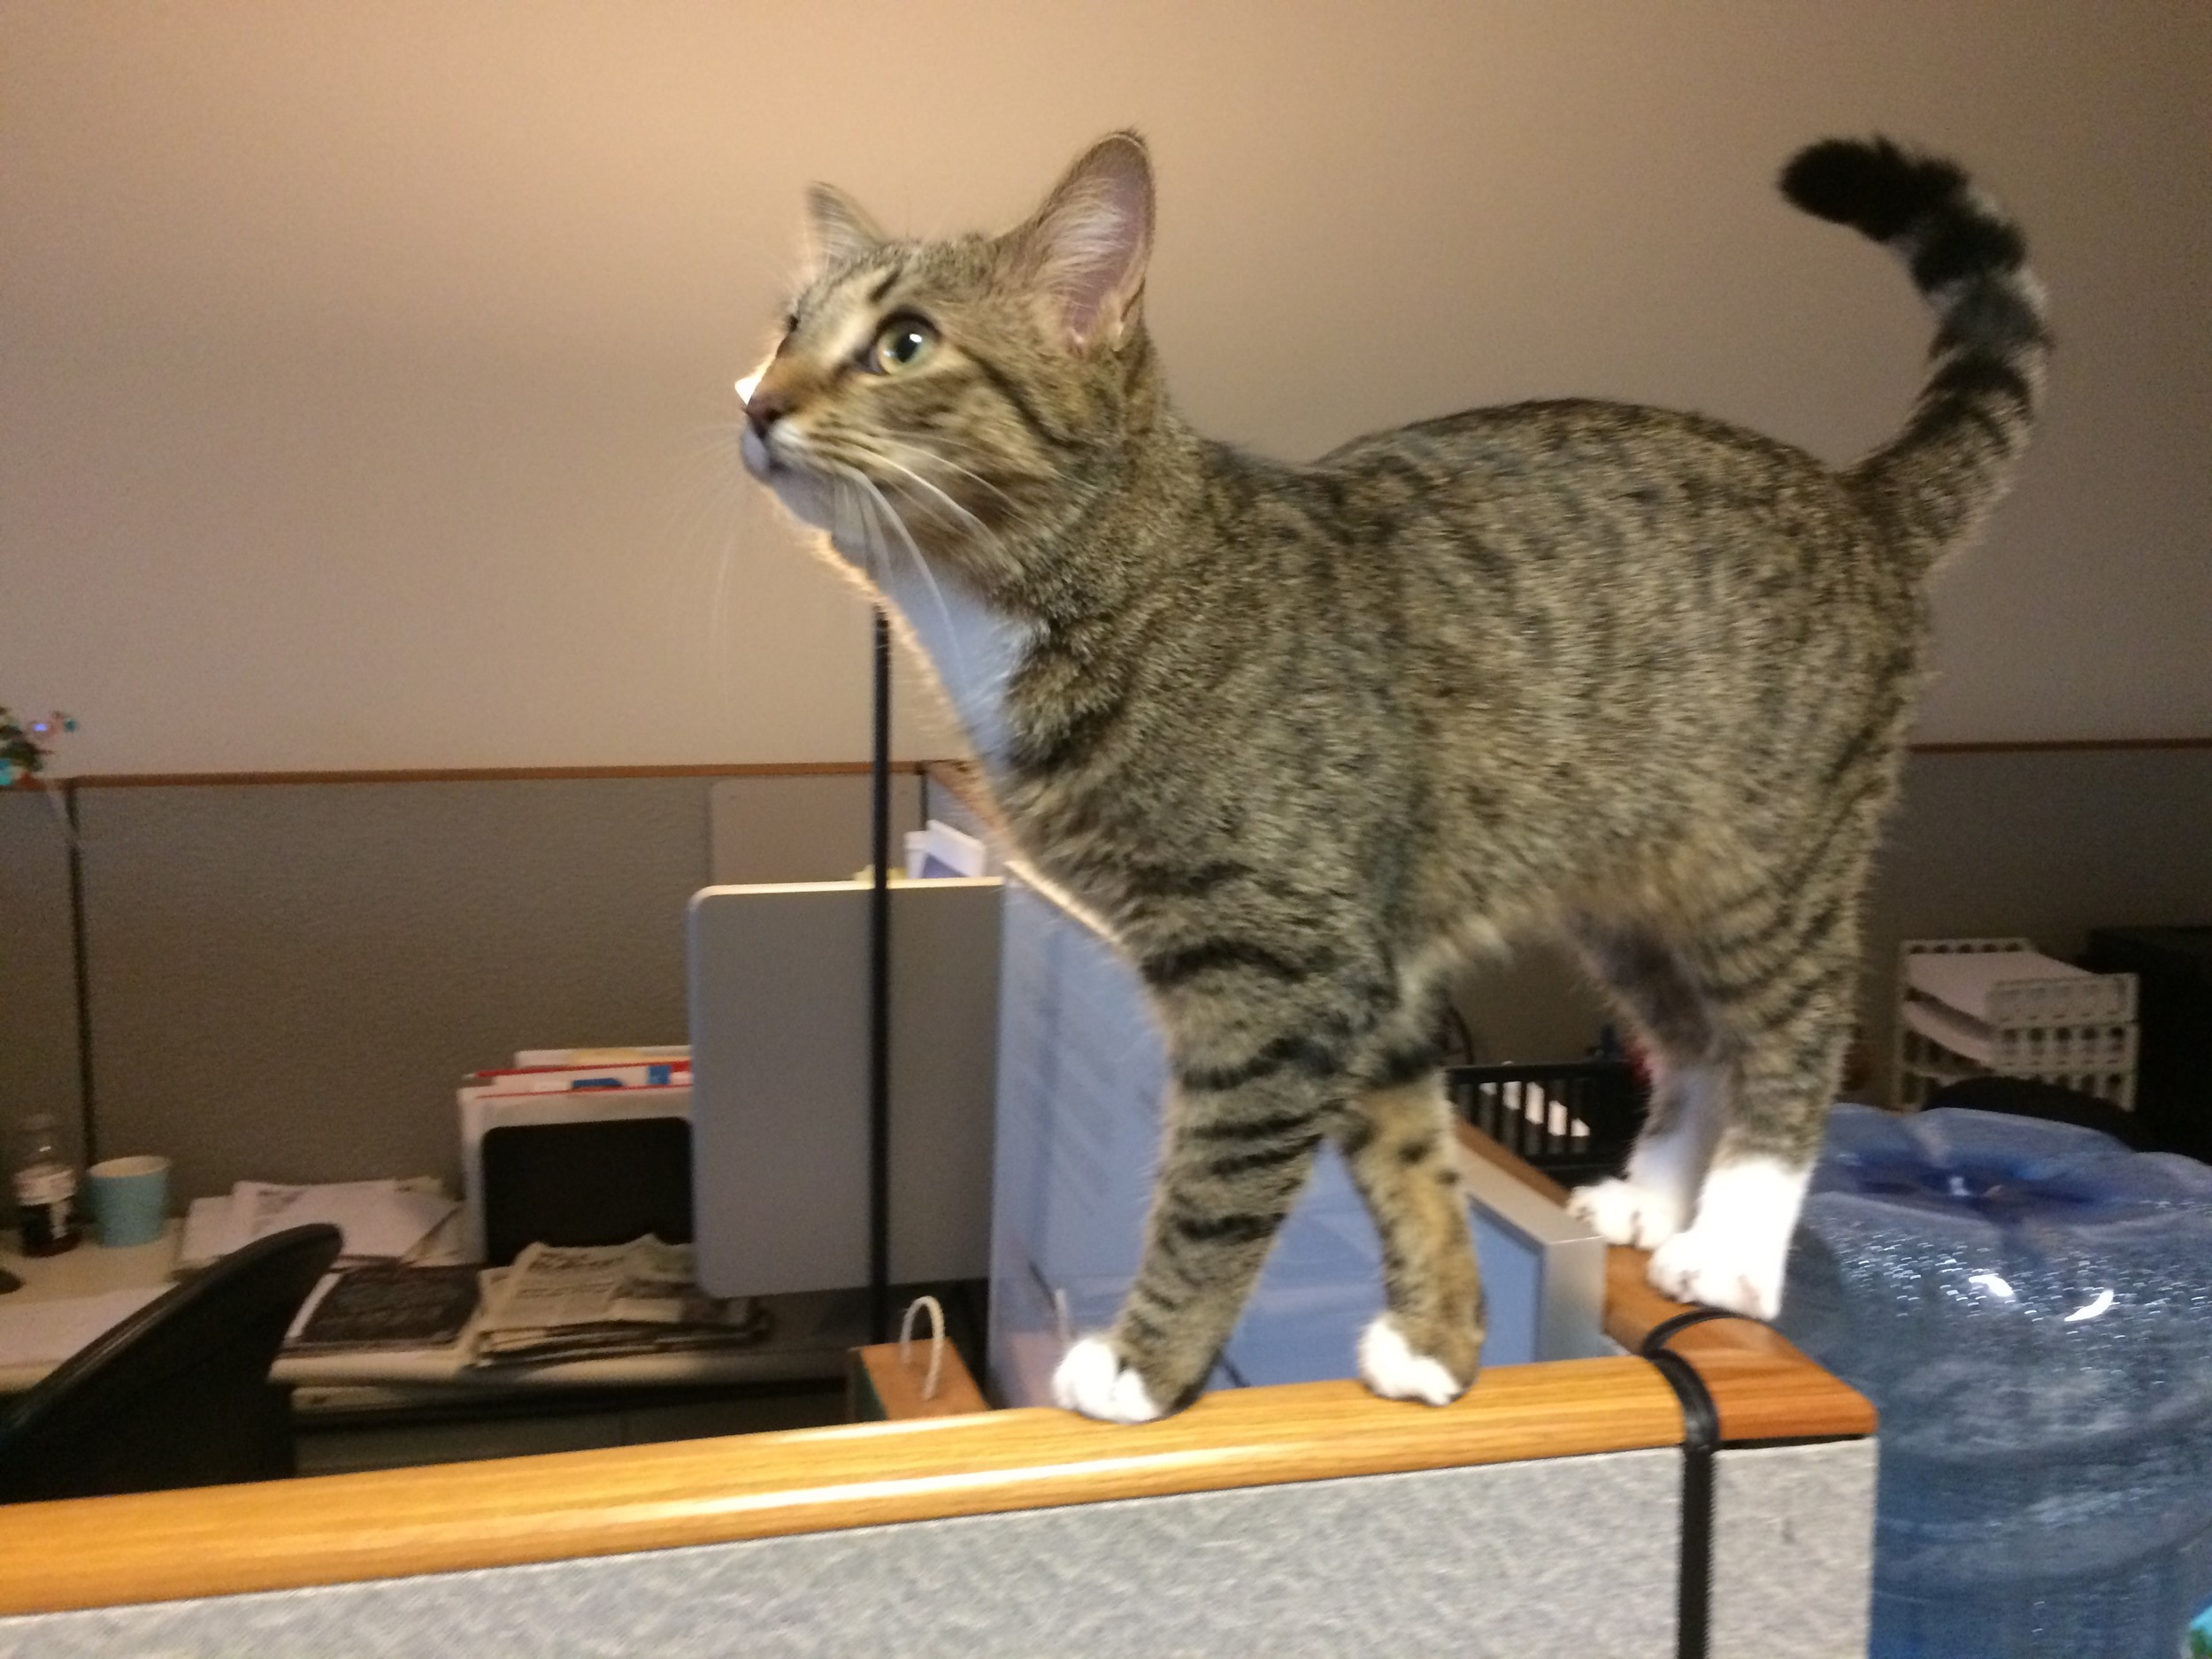 Charlotte, the Ostendorf's kittten, comes to the office on Feline Fridays to help lighten up the end of the week for everyone. Her office antics keep us smiling.